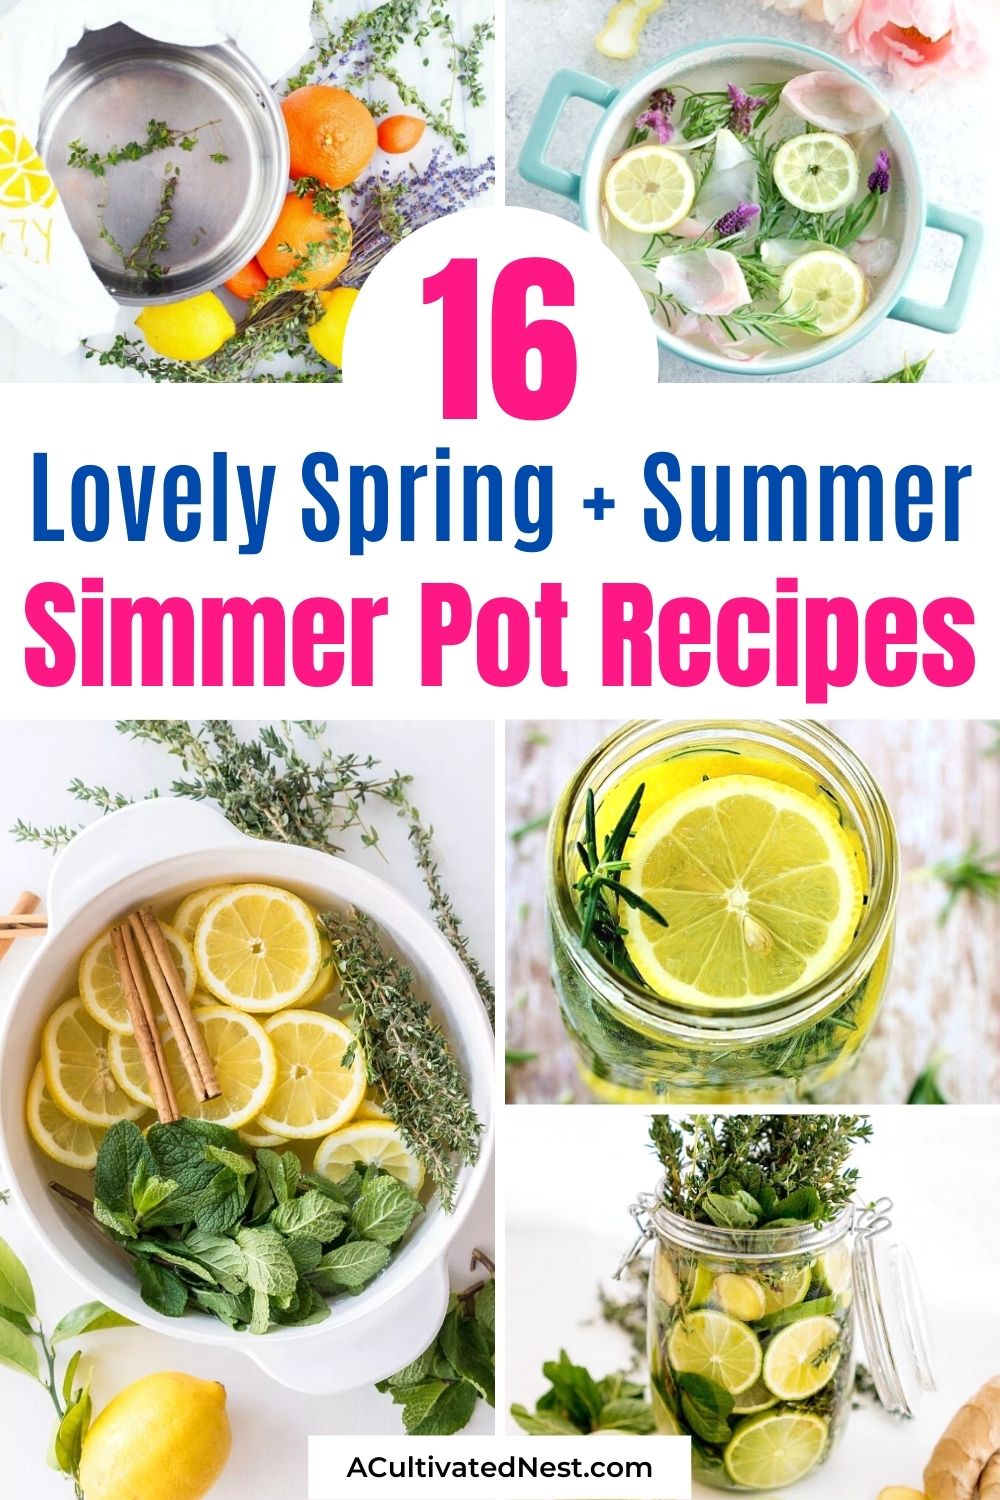 16 DIY Simmer Pot Recipes for Spring and Summer- An easy way to make your home smell great this spring and summer naturally is with these wonderful smelling DIY simmer pot recipes! | natural air freshener, how to make your home smell good, chemical-free DIY air freshener, #DIY #potpourri #simmerPot #diyPotpourri #ACultivatedNest